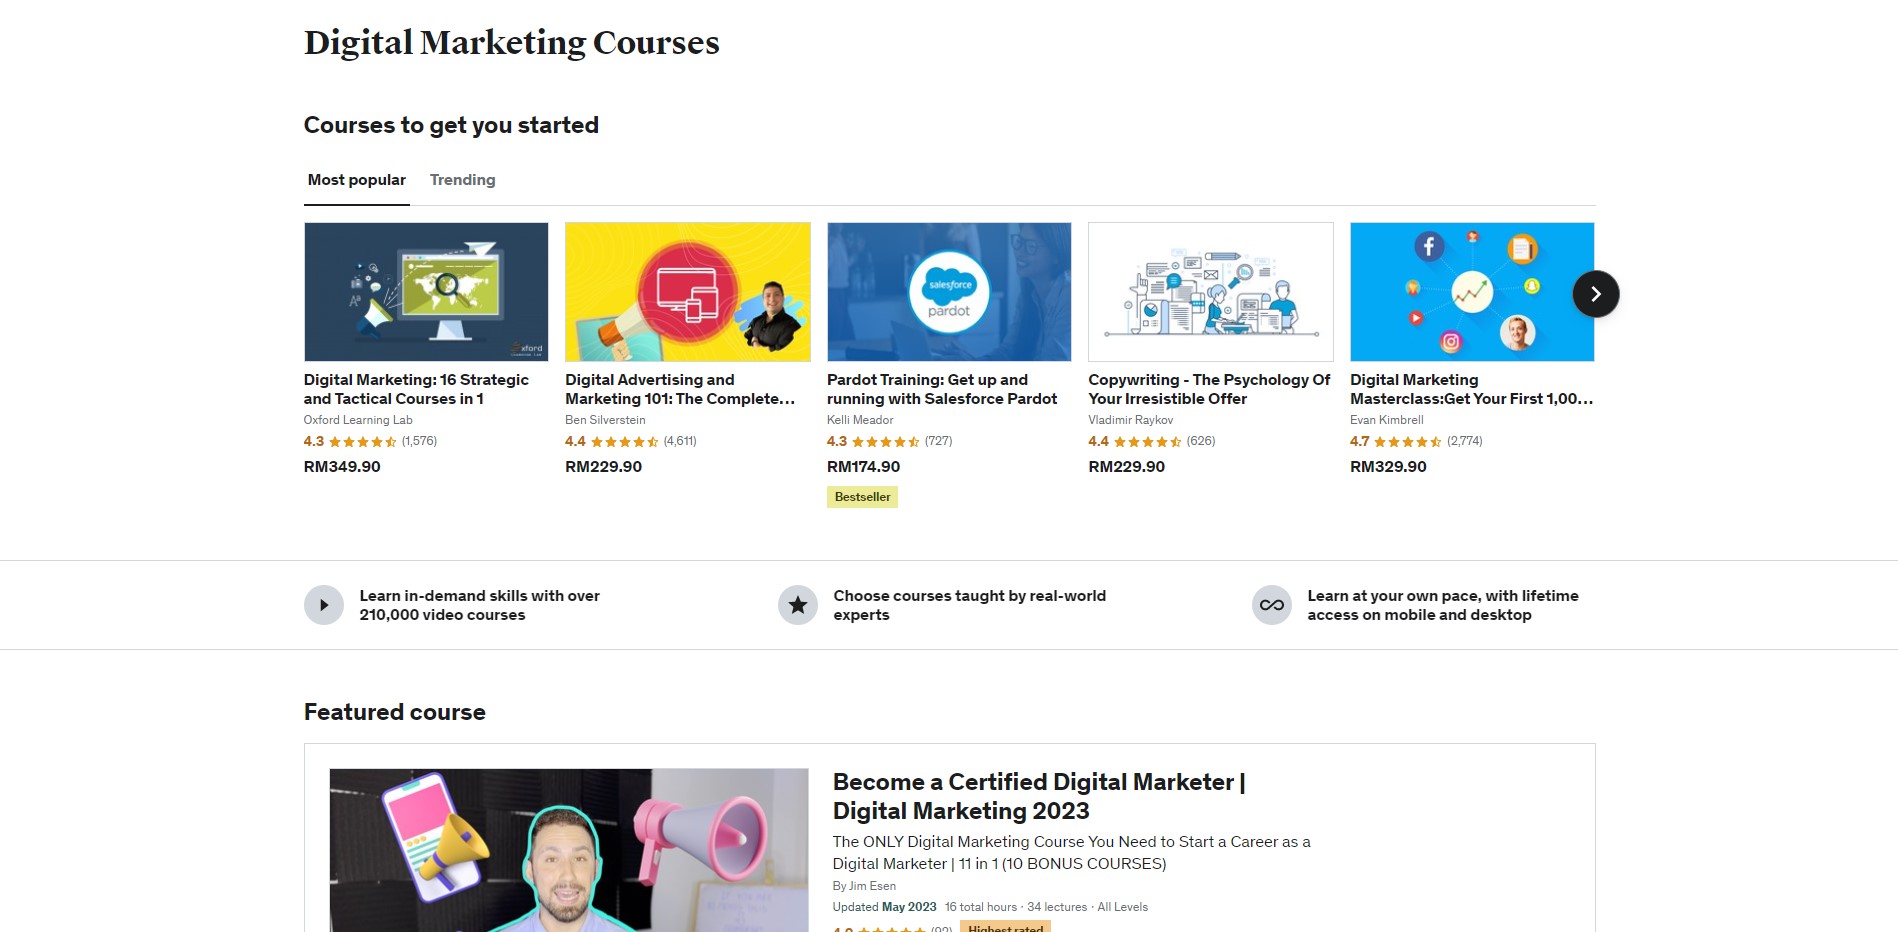 Udemy offers a lot of free and cheap digital marketing courses